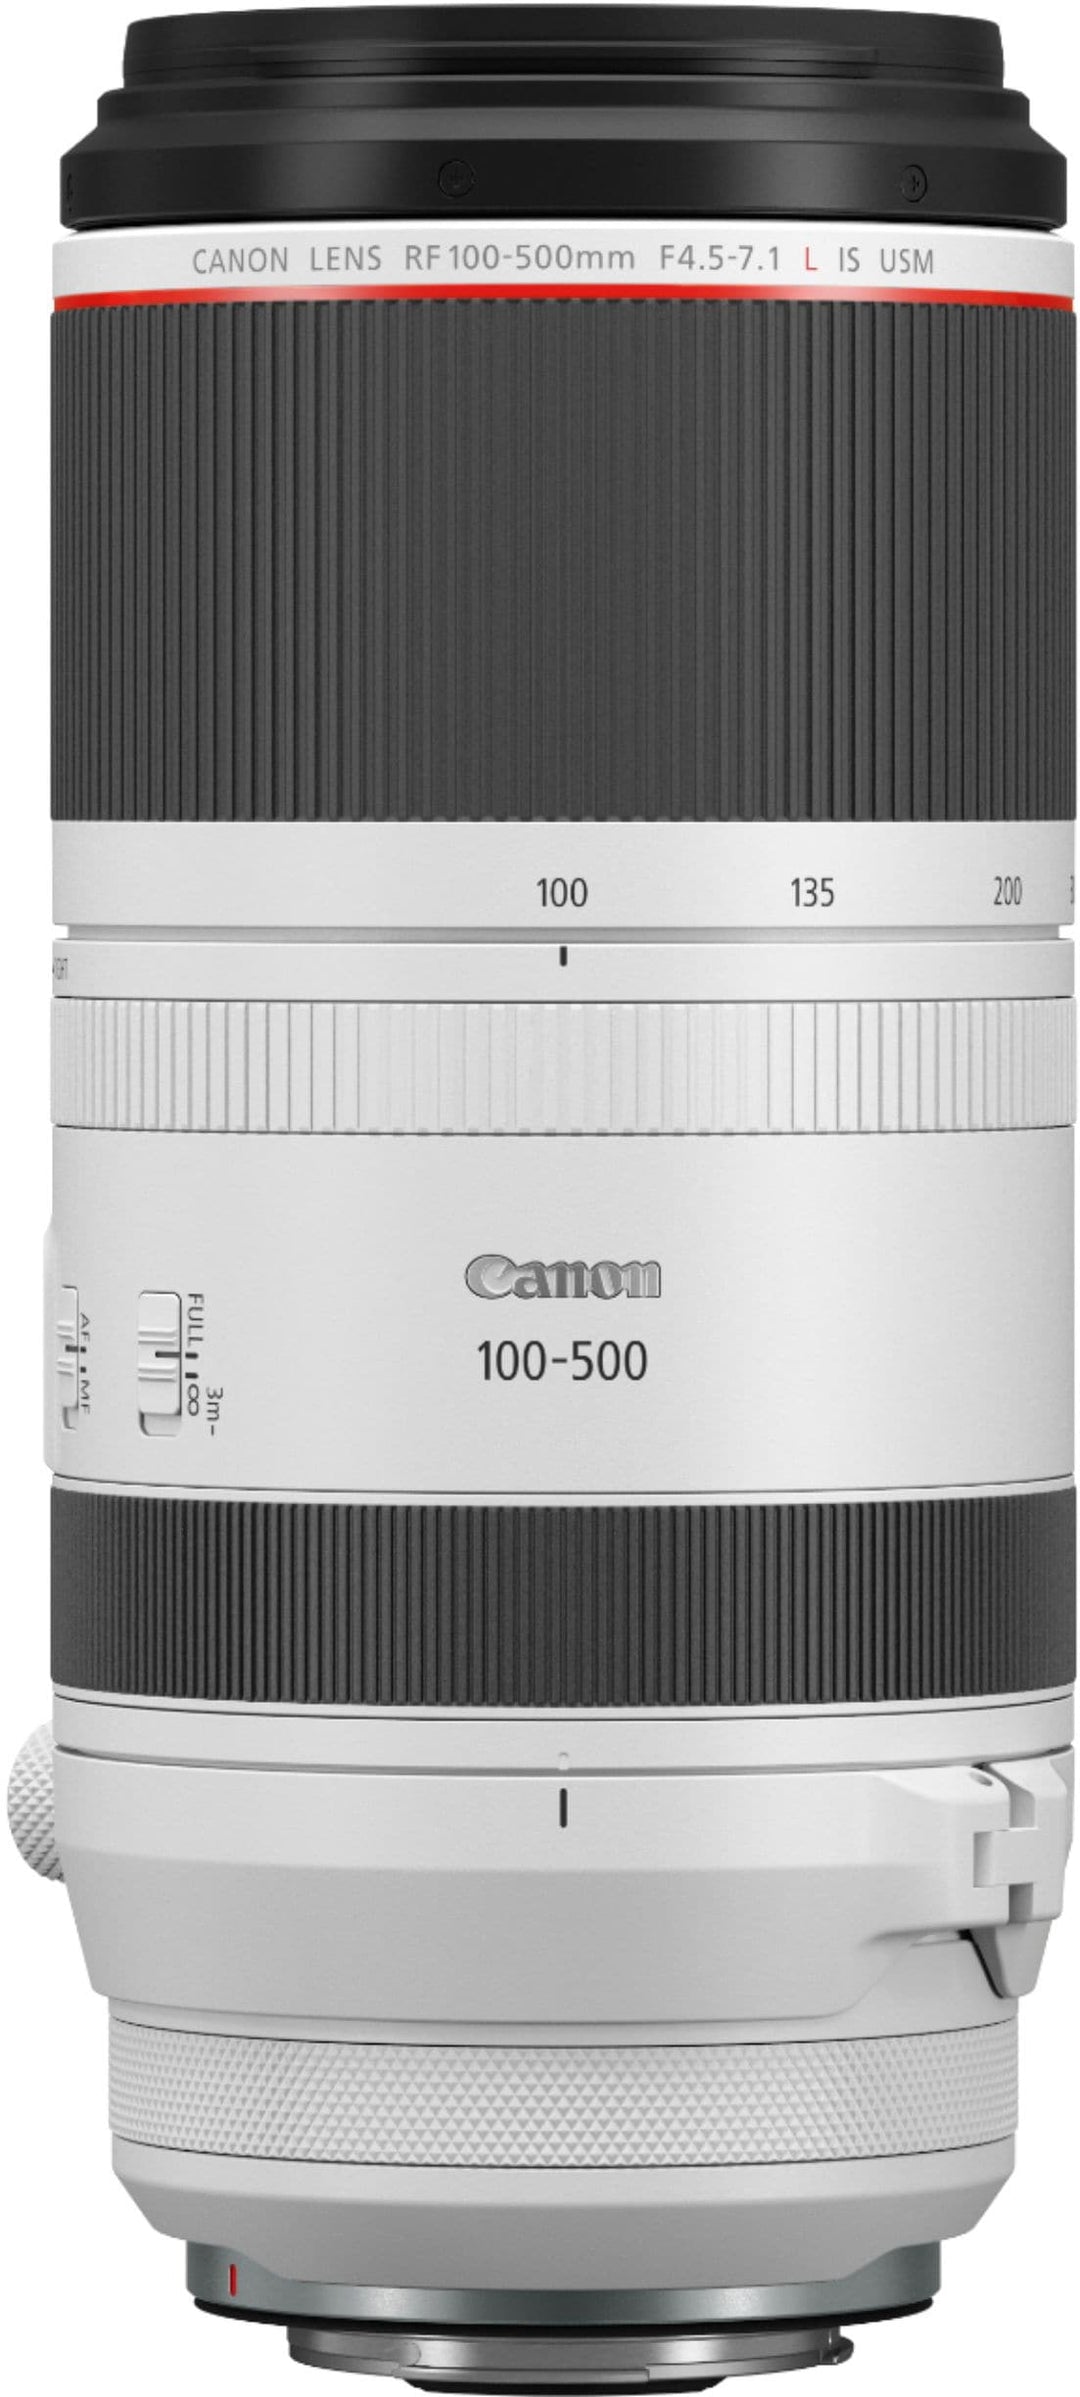 Canon - RF 100-500mm f/4.5-7.1 L IS USM Telephoto Zoom Lens - White_5